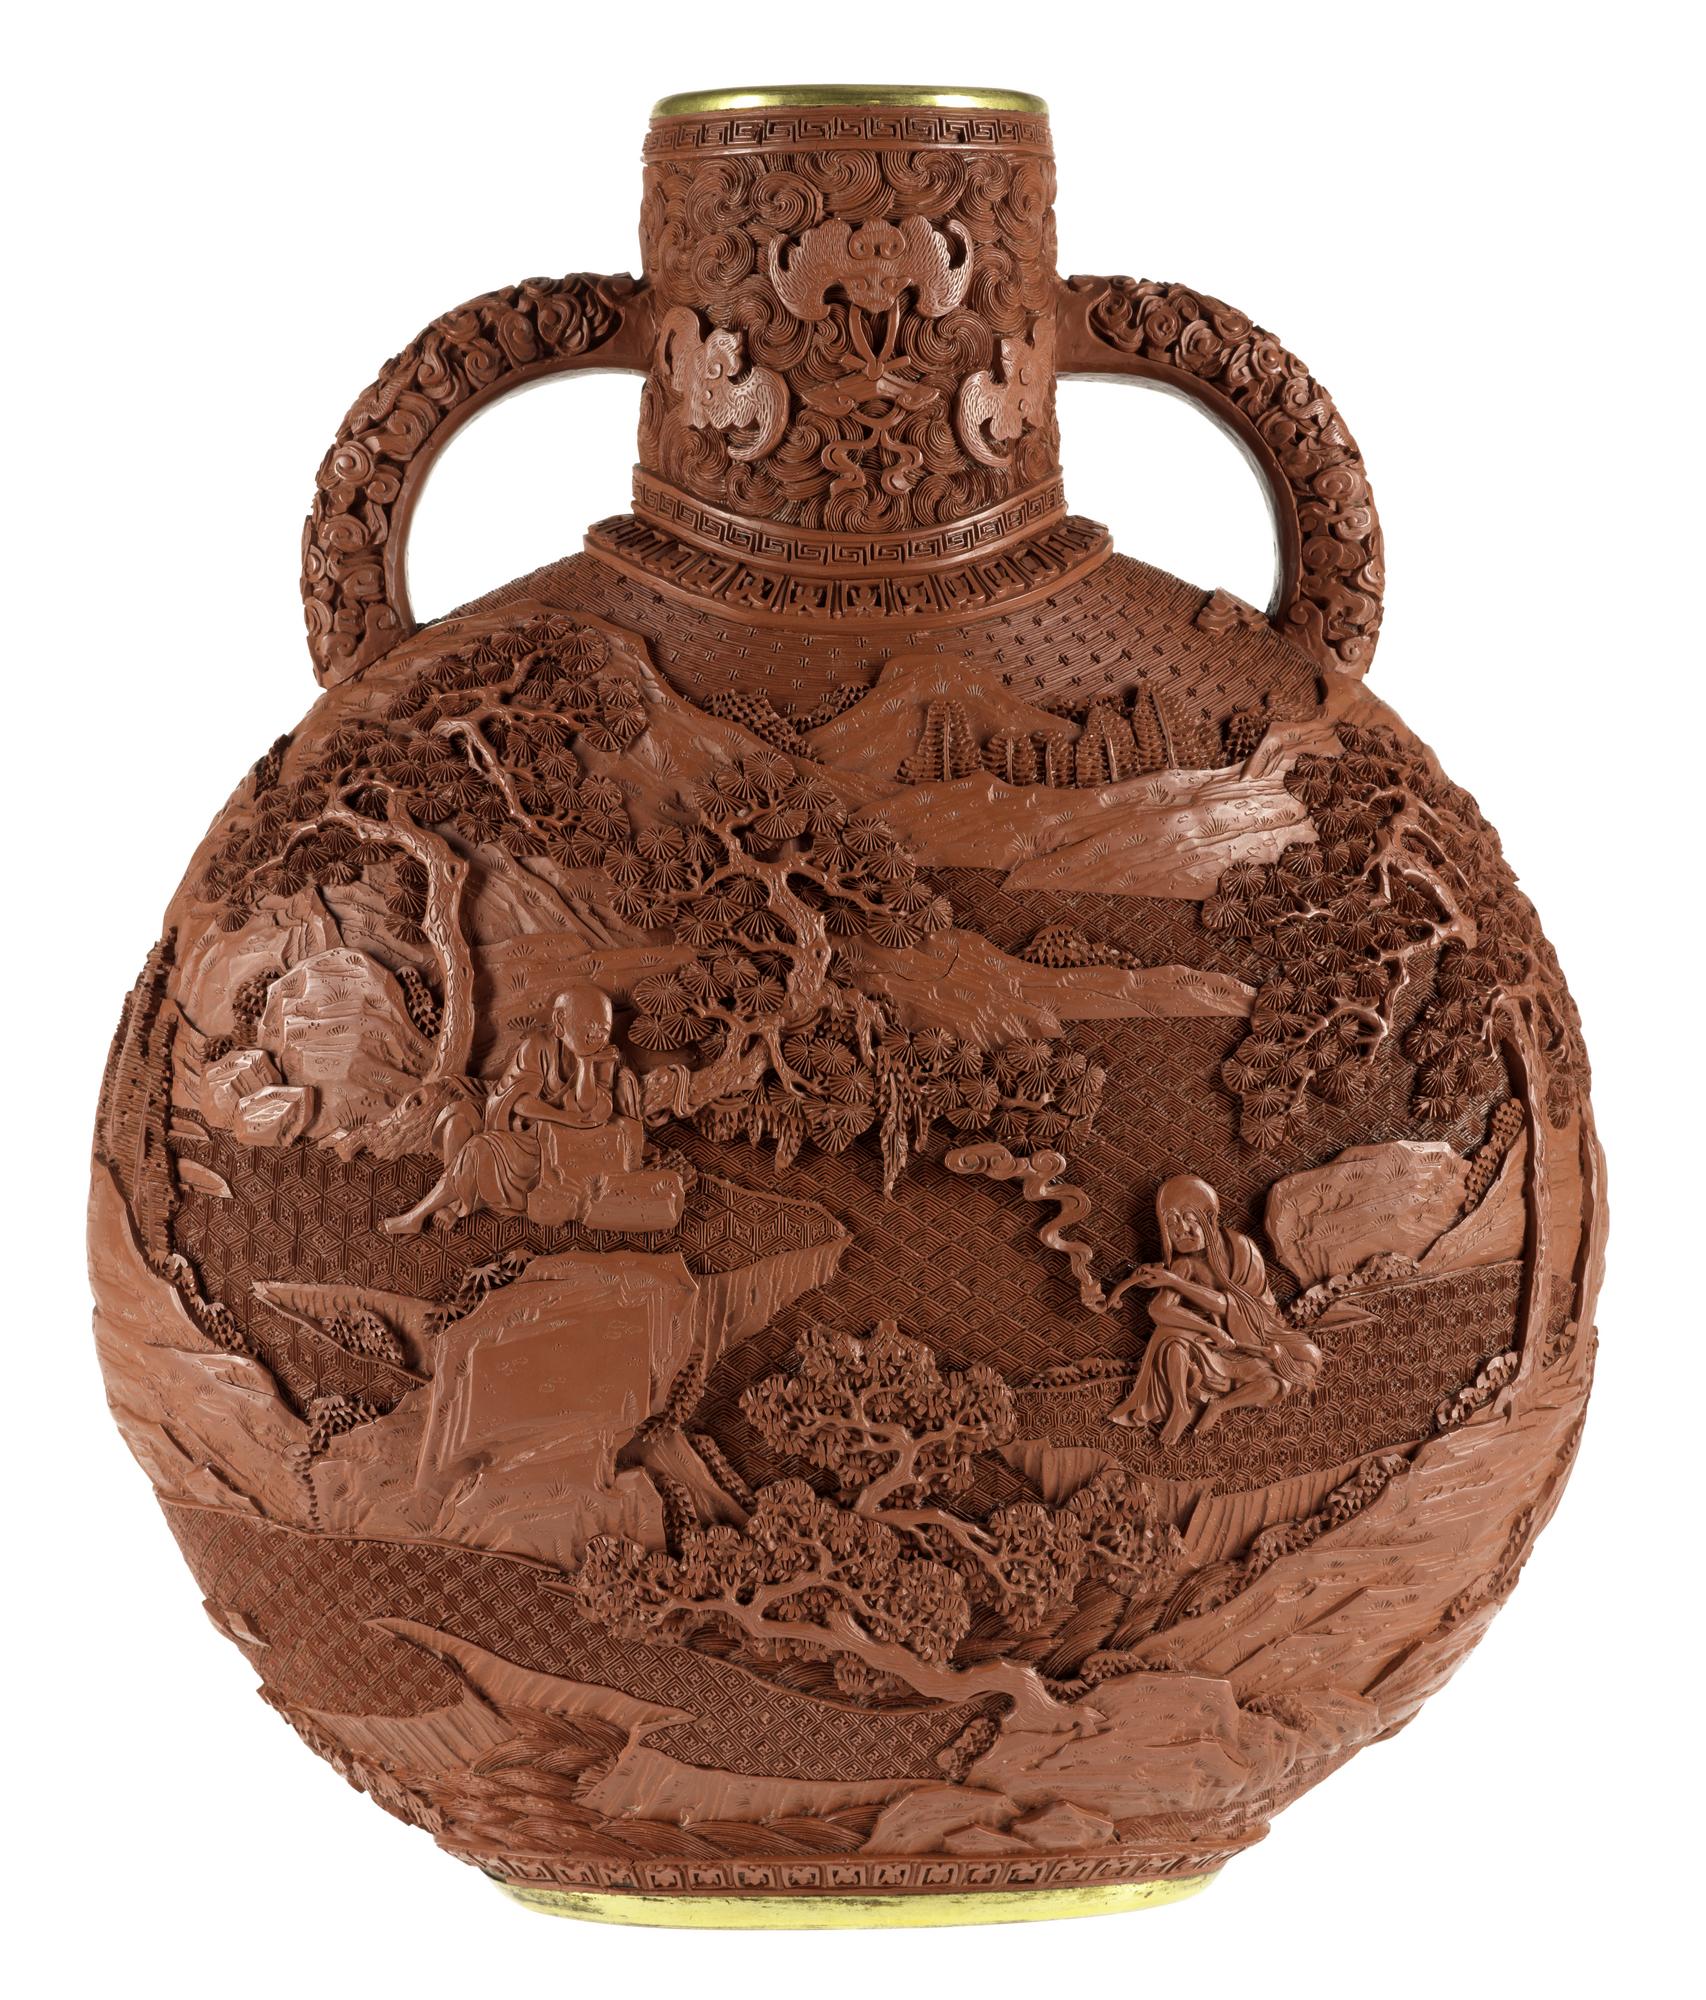 Moon flask of carved red lacquer on a porcelain body, decorated on both sides with a landscape: China, Qing dynasty, late 19th century.